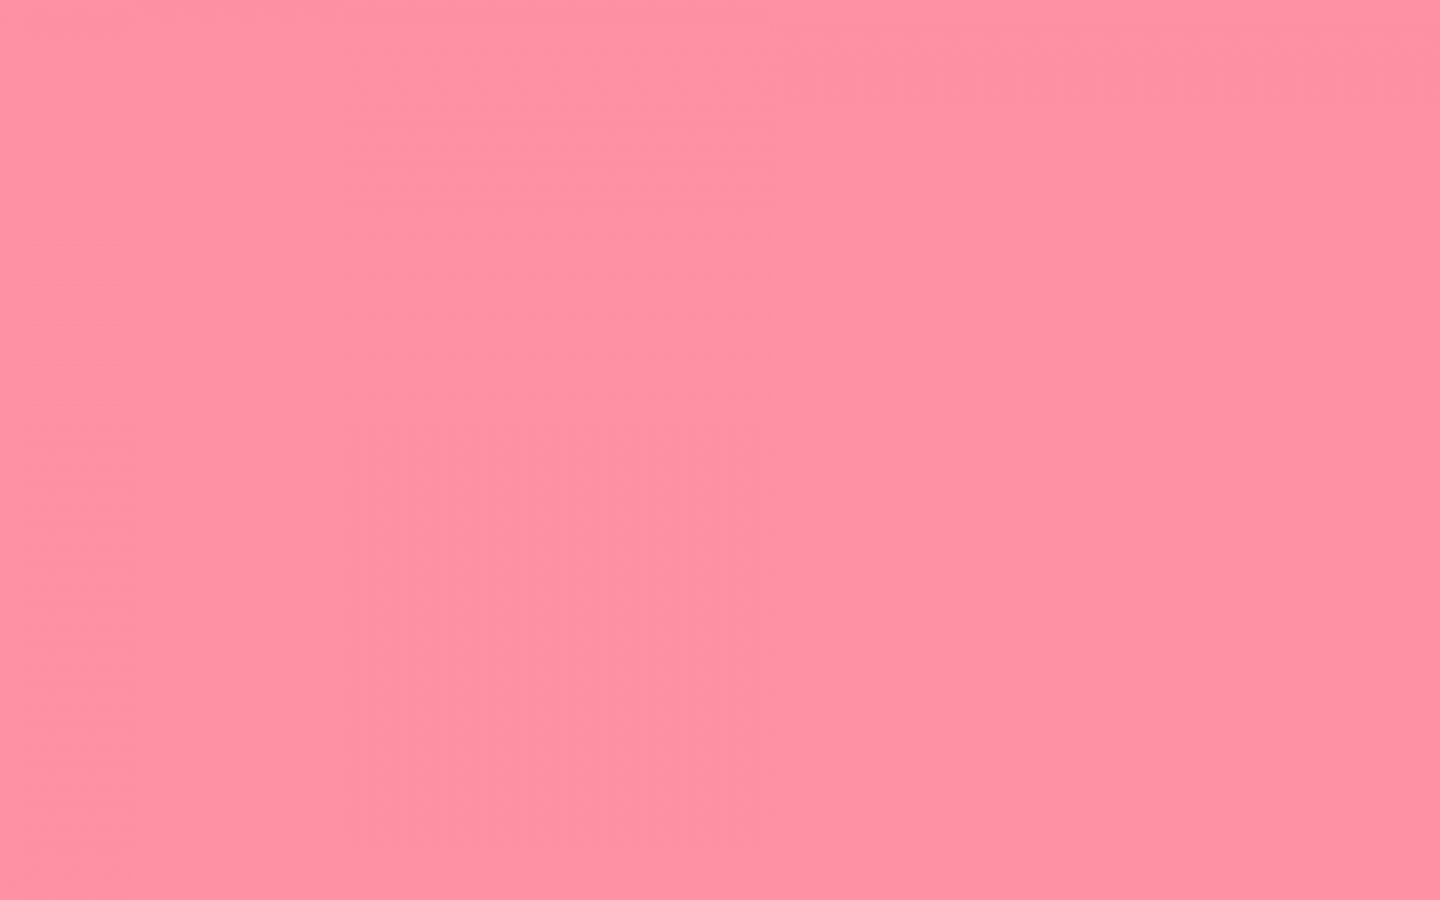 A pink background - Salmon